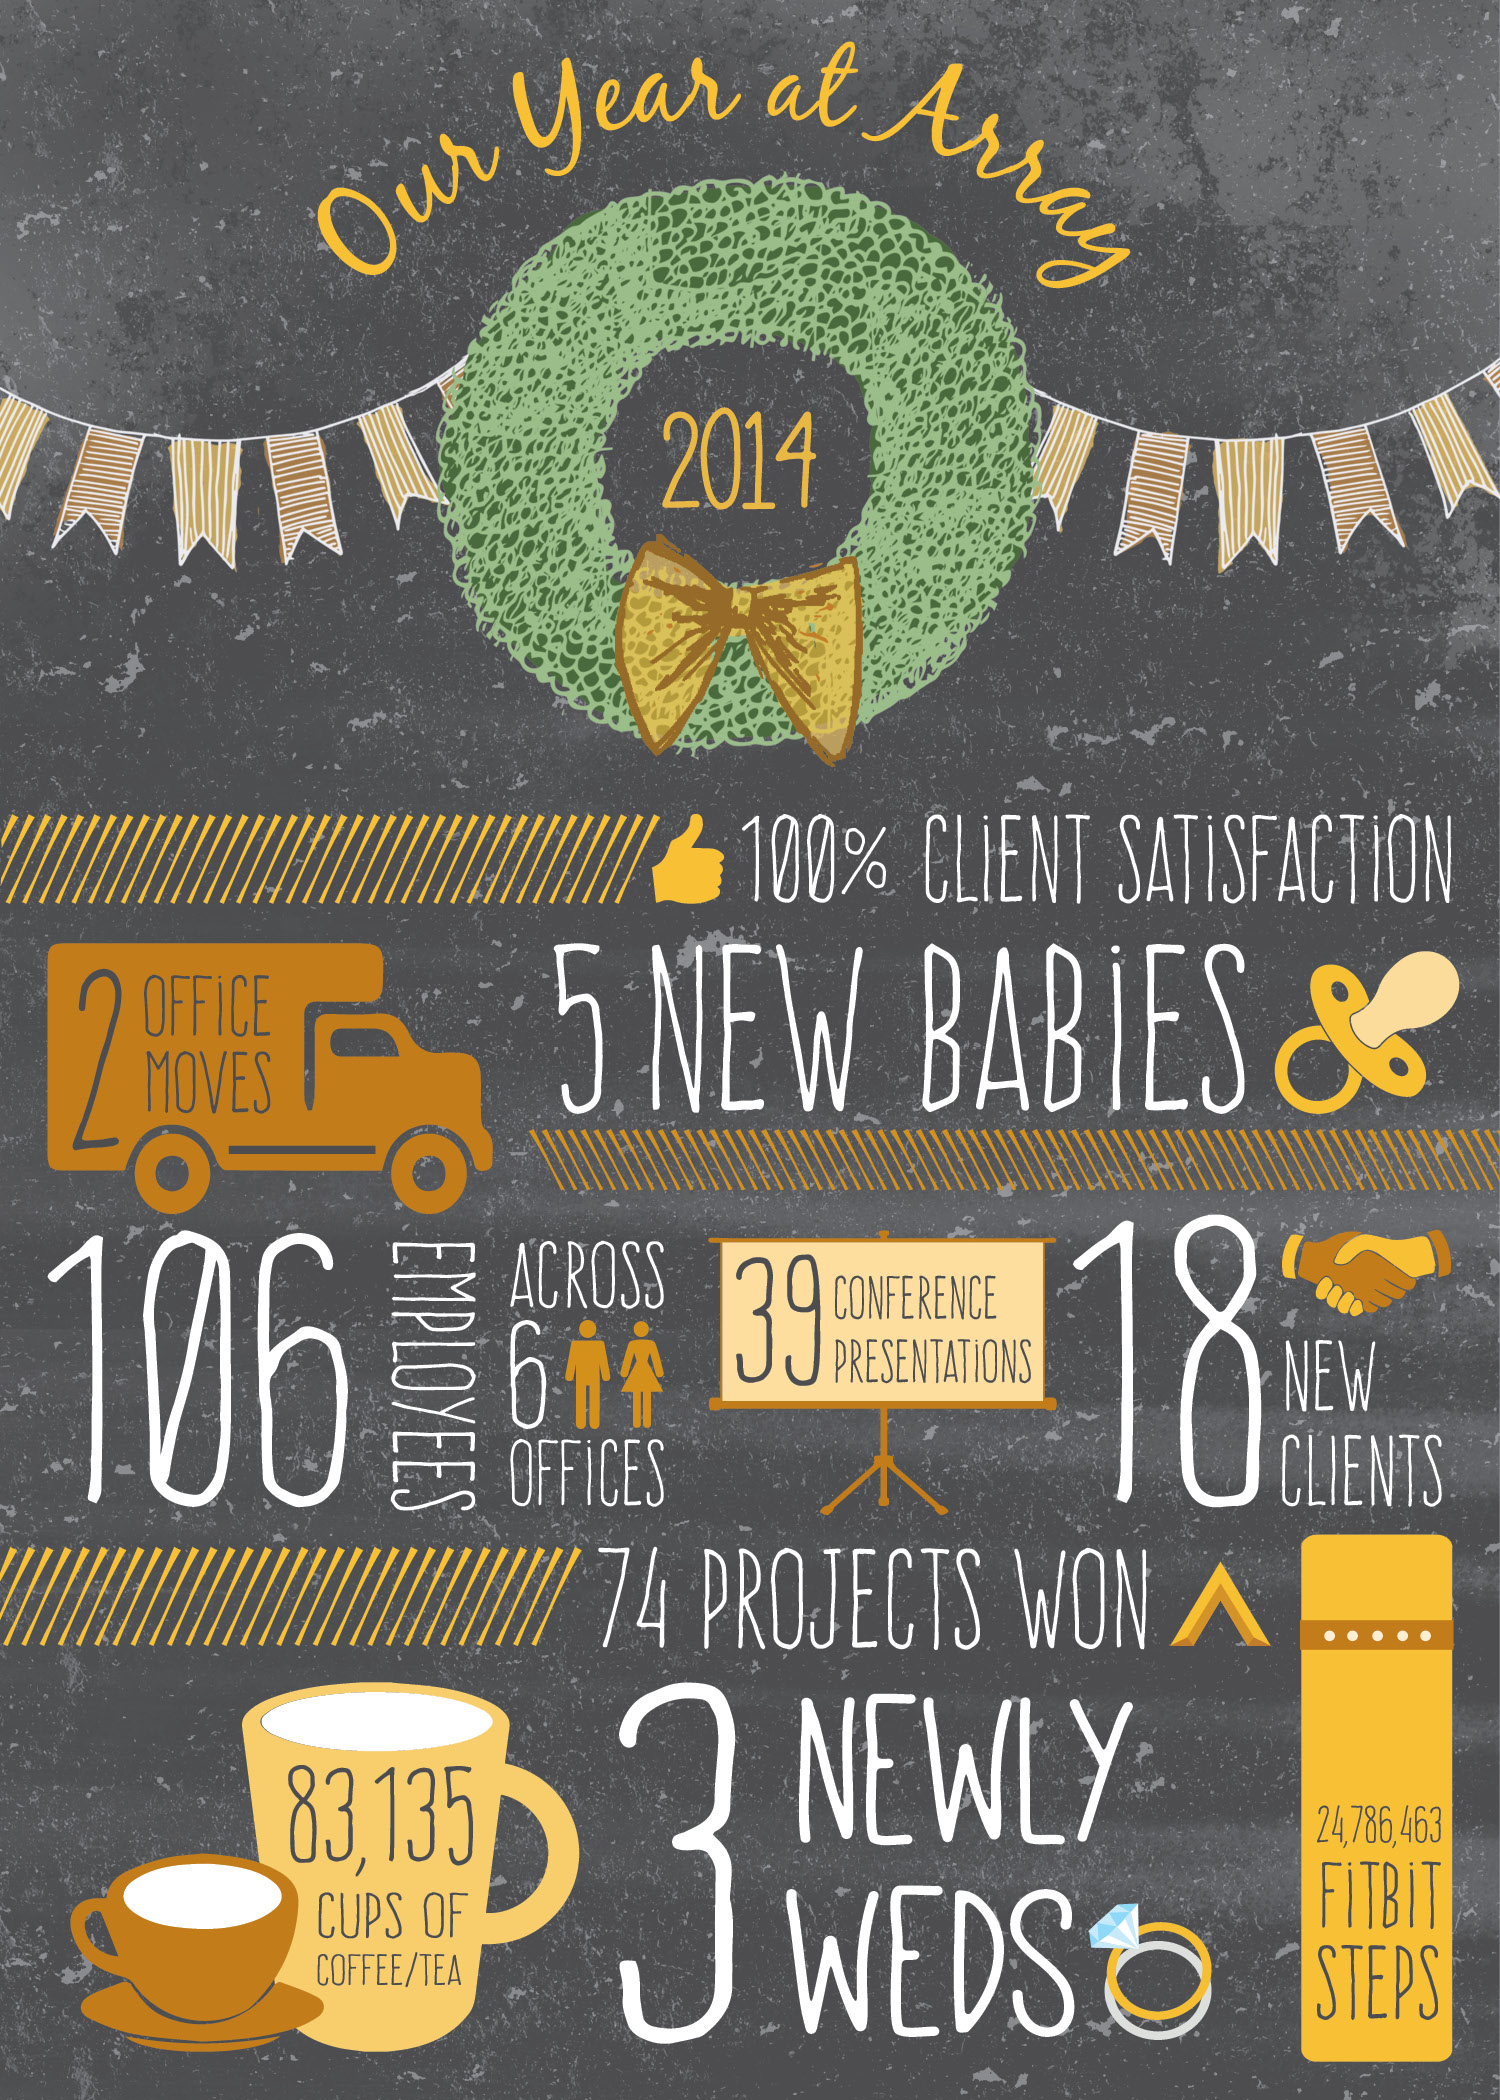 Happy Holidays Infographic from Array Architects